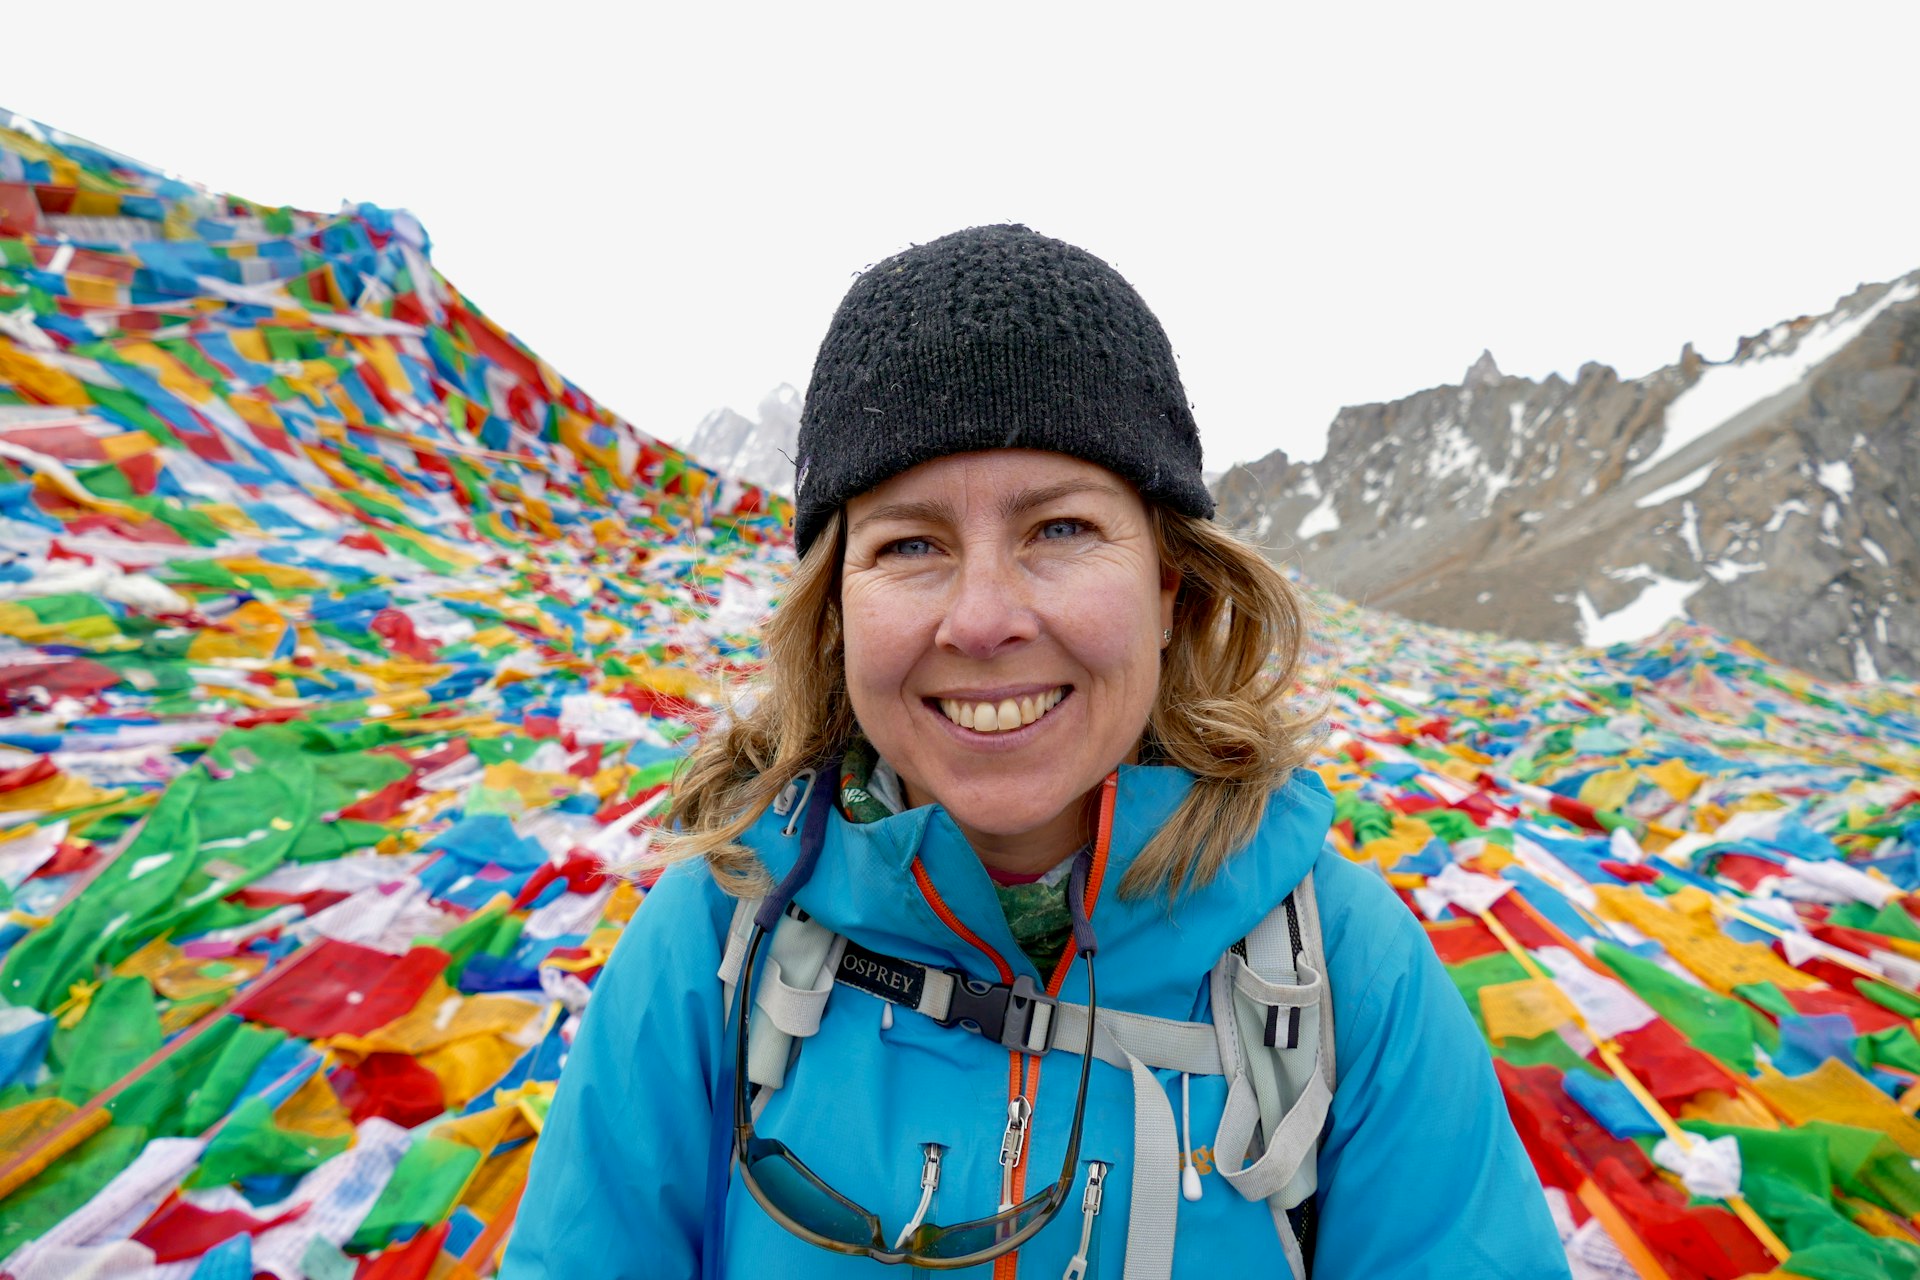 A selfie of a woman on a mountaintop surrounded by colorful prayer flags